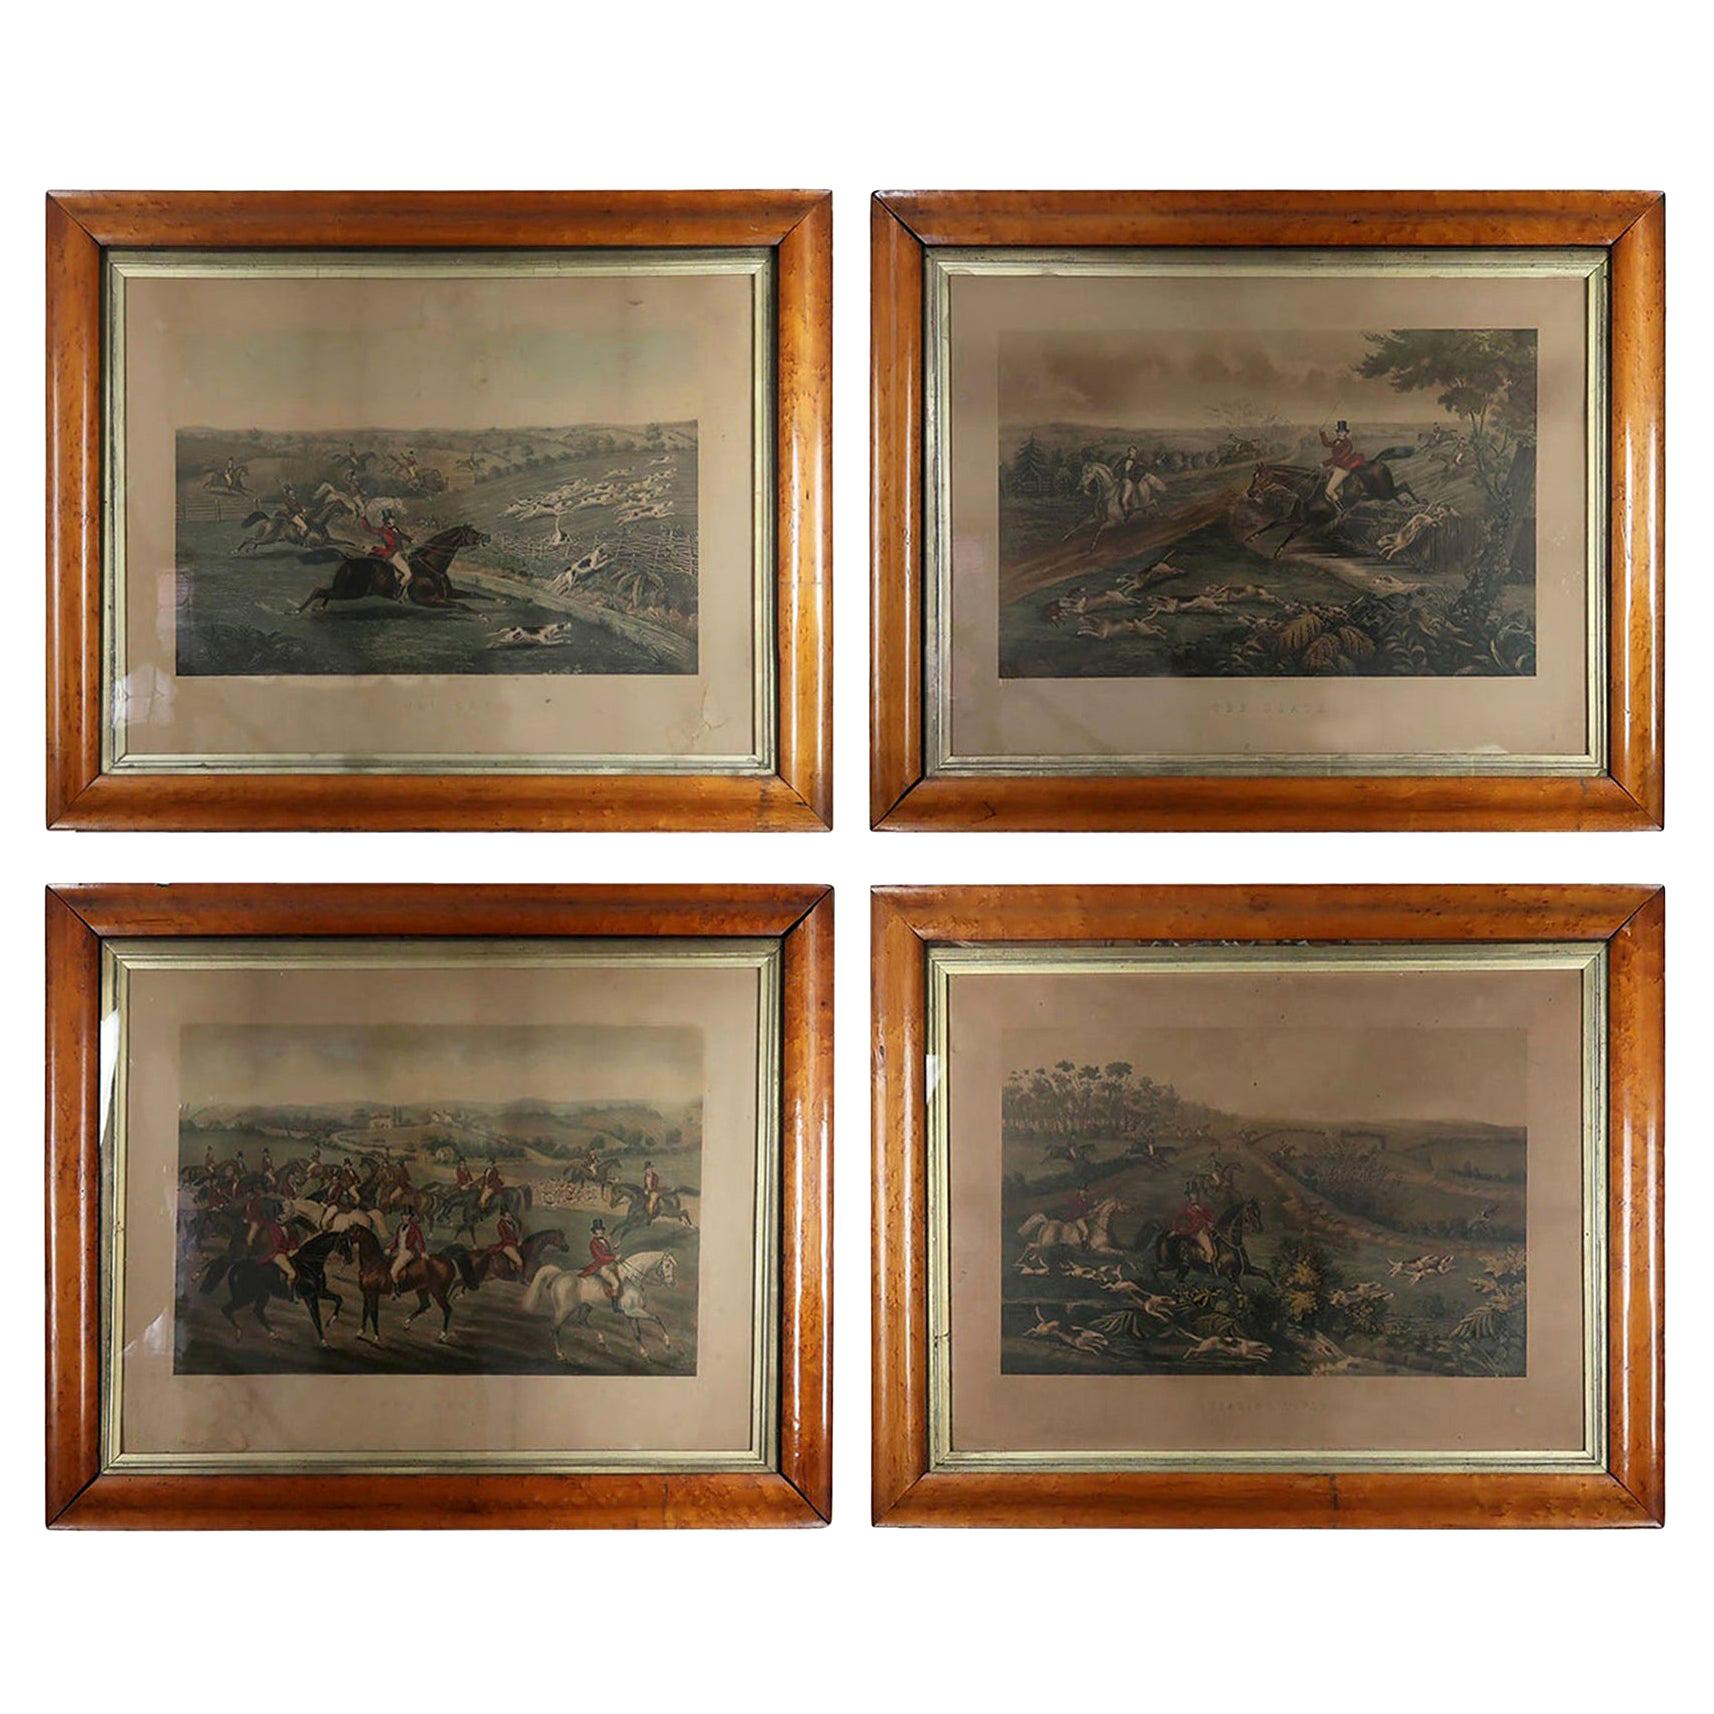 Set of 4 Large Scale Antique Sporting Prints, German, Mid-19th Century